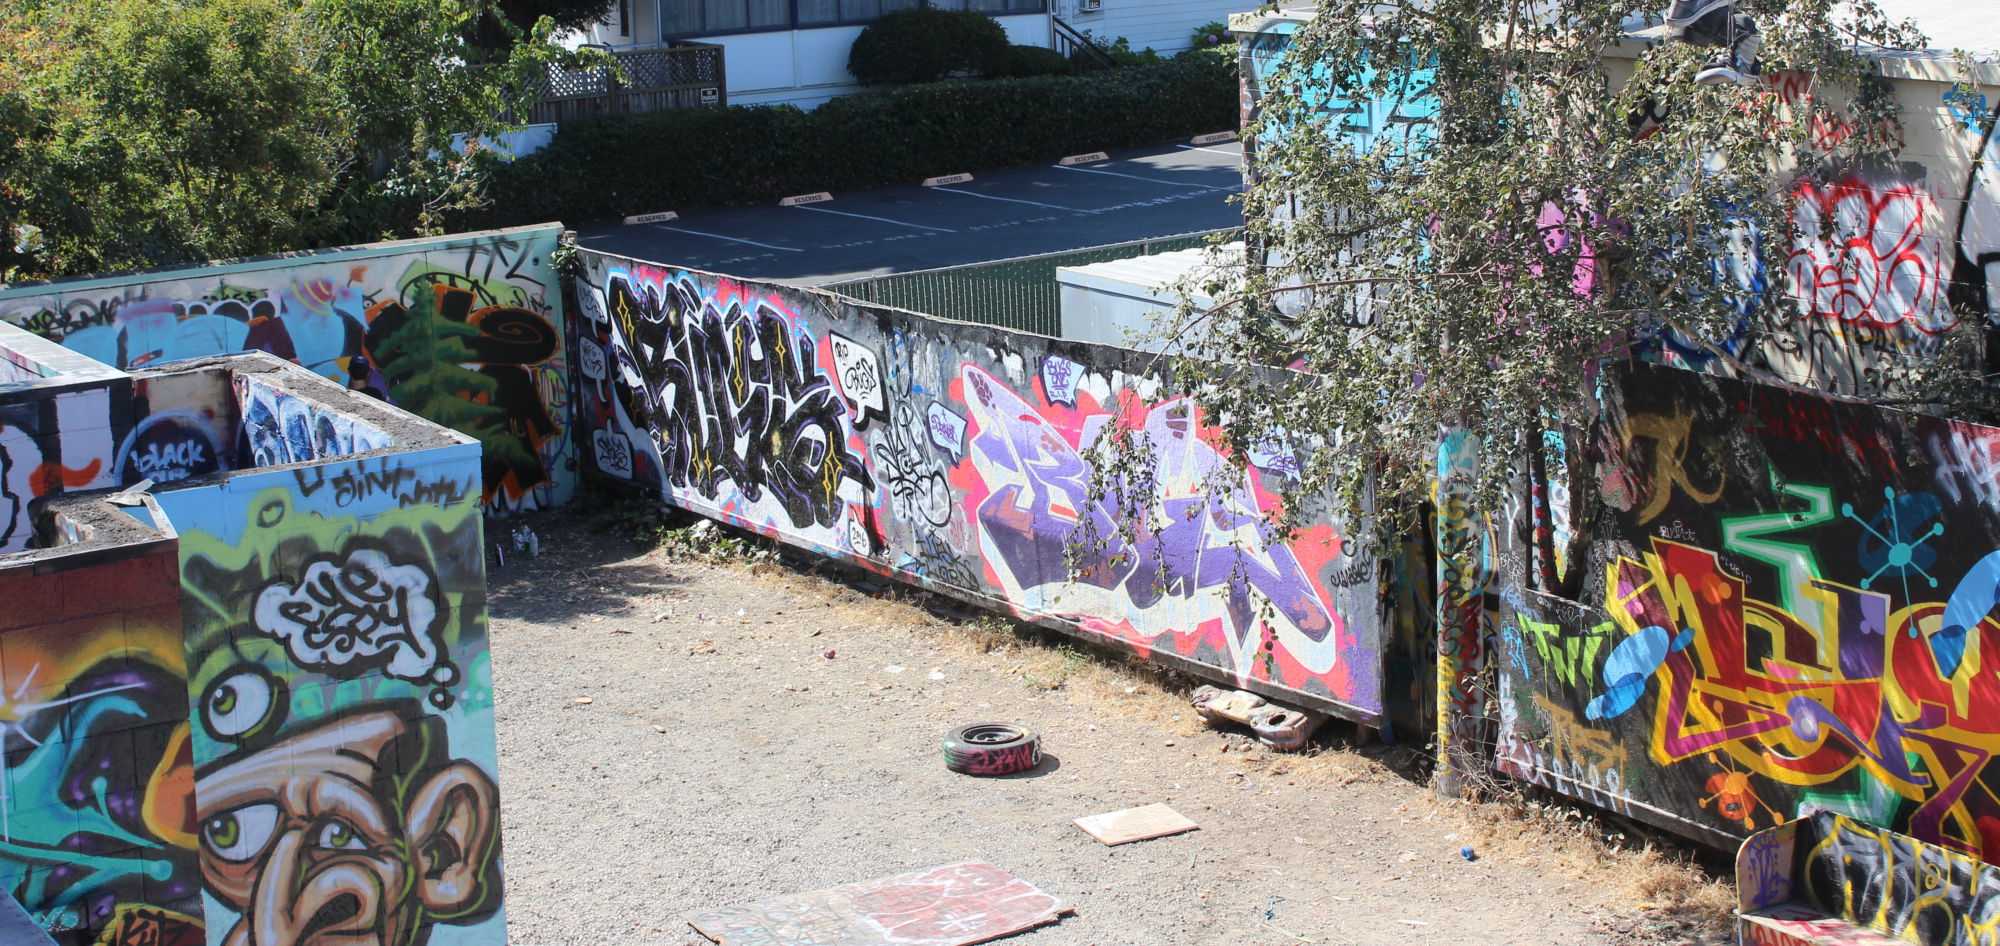 An elevated view of the legal graffiti wall where Addleman and Bettinger practice at the Phoenix Theater in Petaluma.